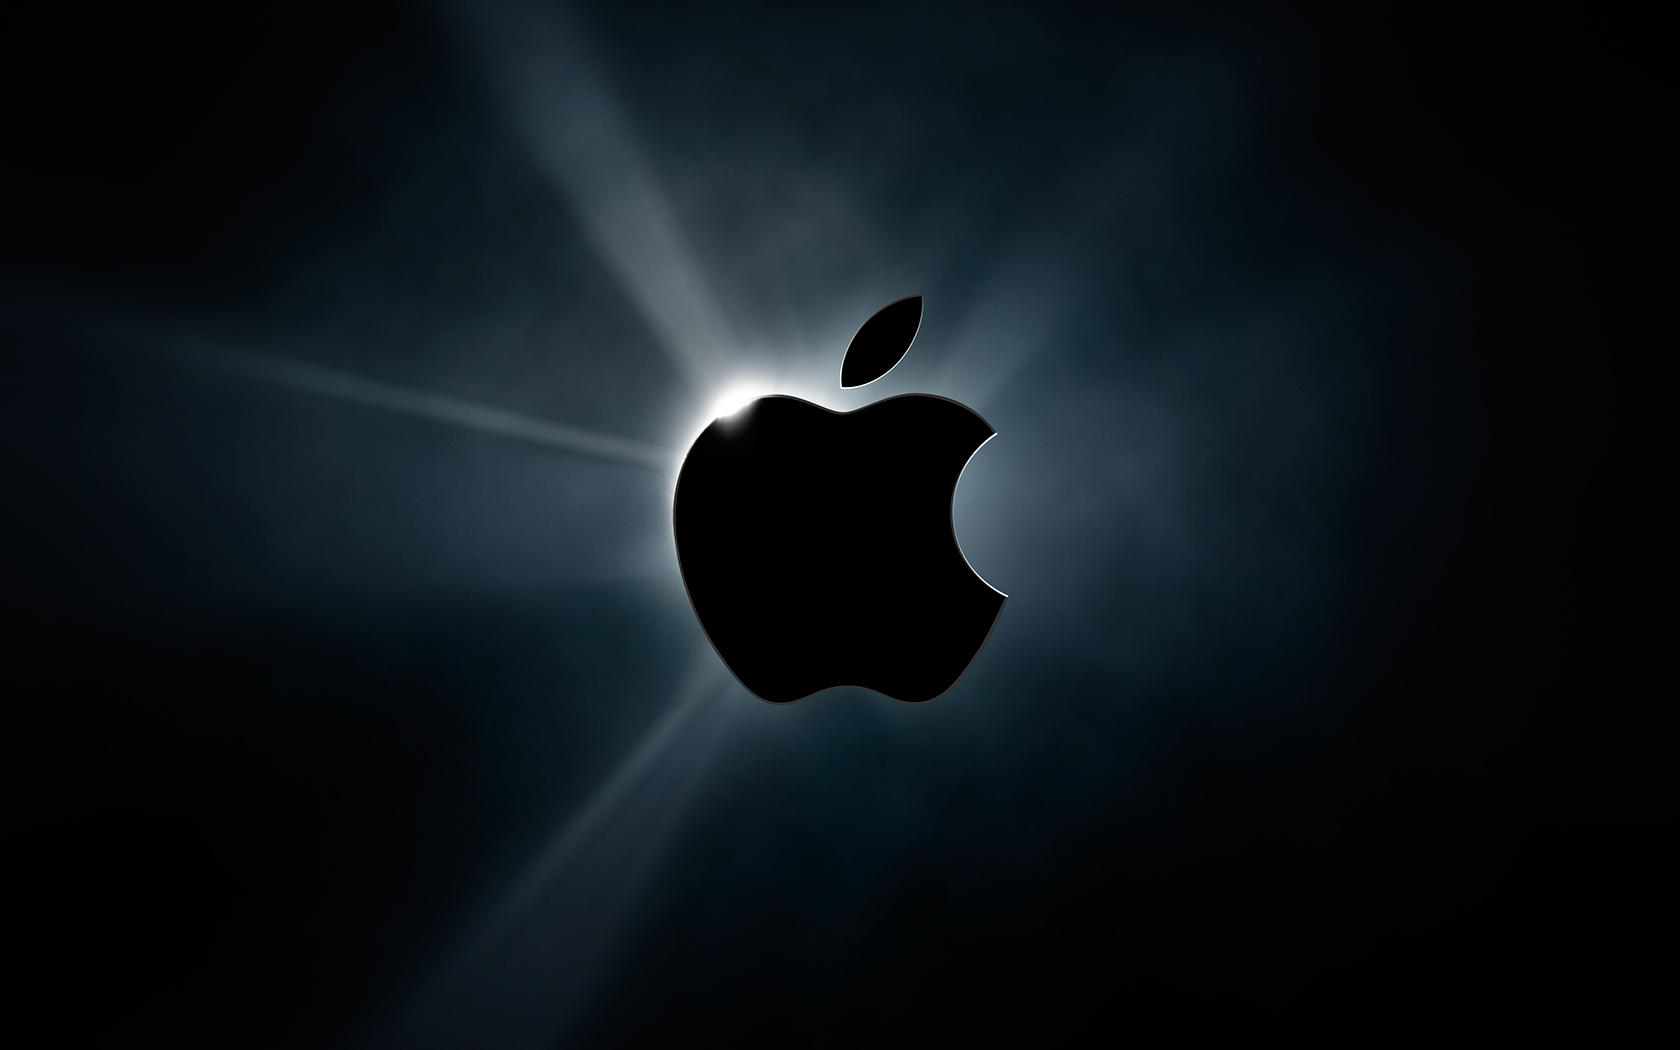 Apple's fall event to happen on September 7th? - 9to5Mac